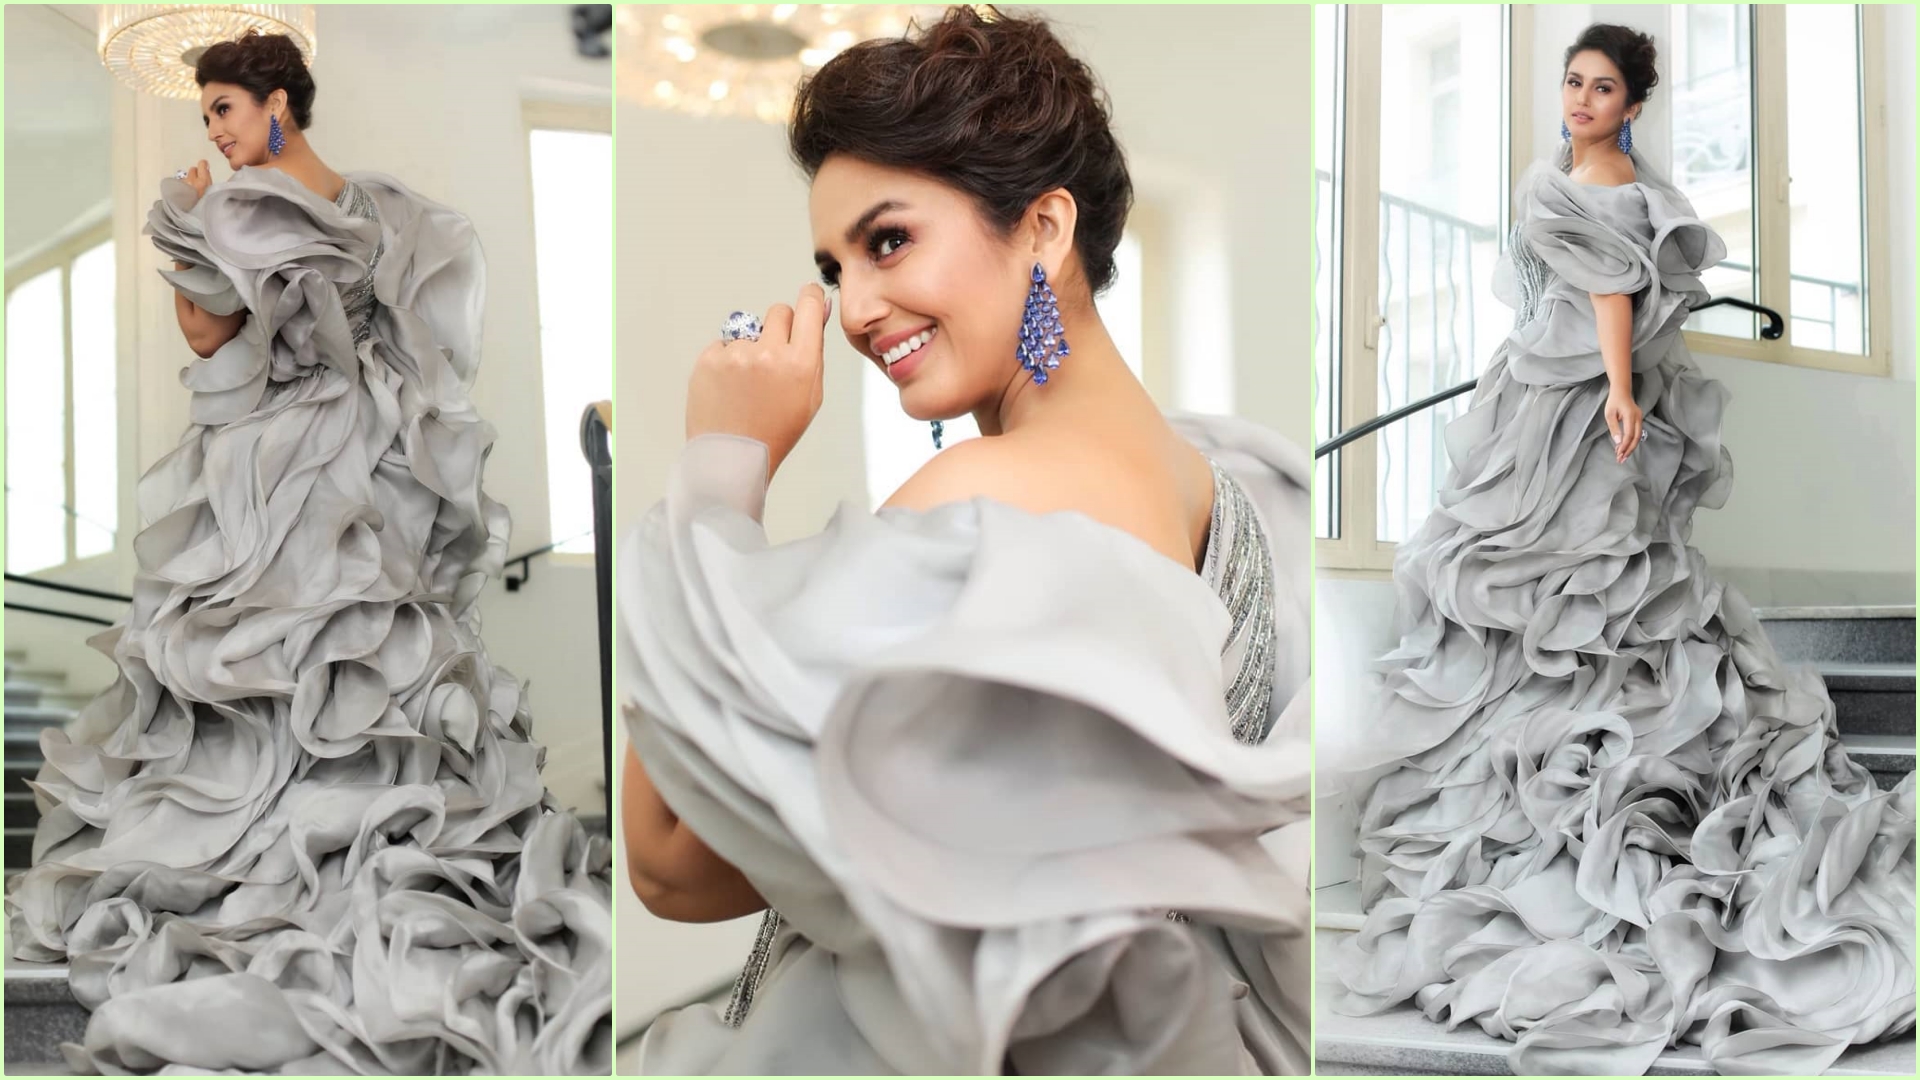 Huma Qureshi looked glamorous in an ivory gown, with a plunging neckline  and silver embellished bralette Photo